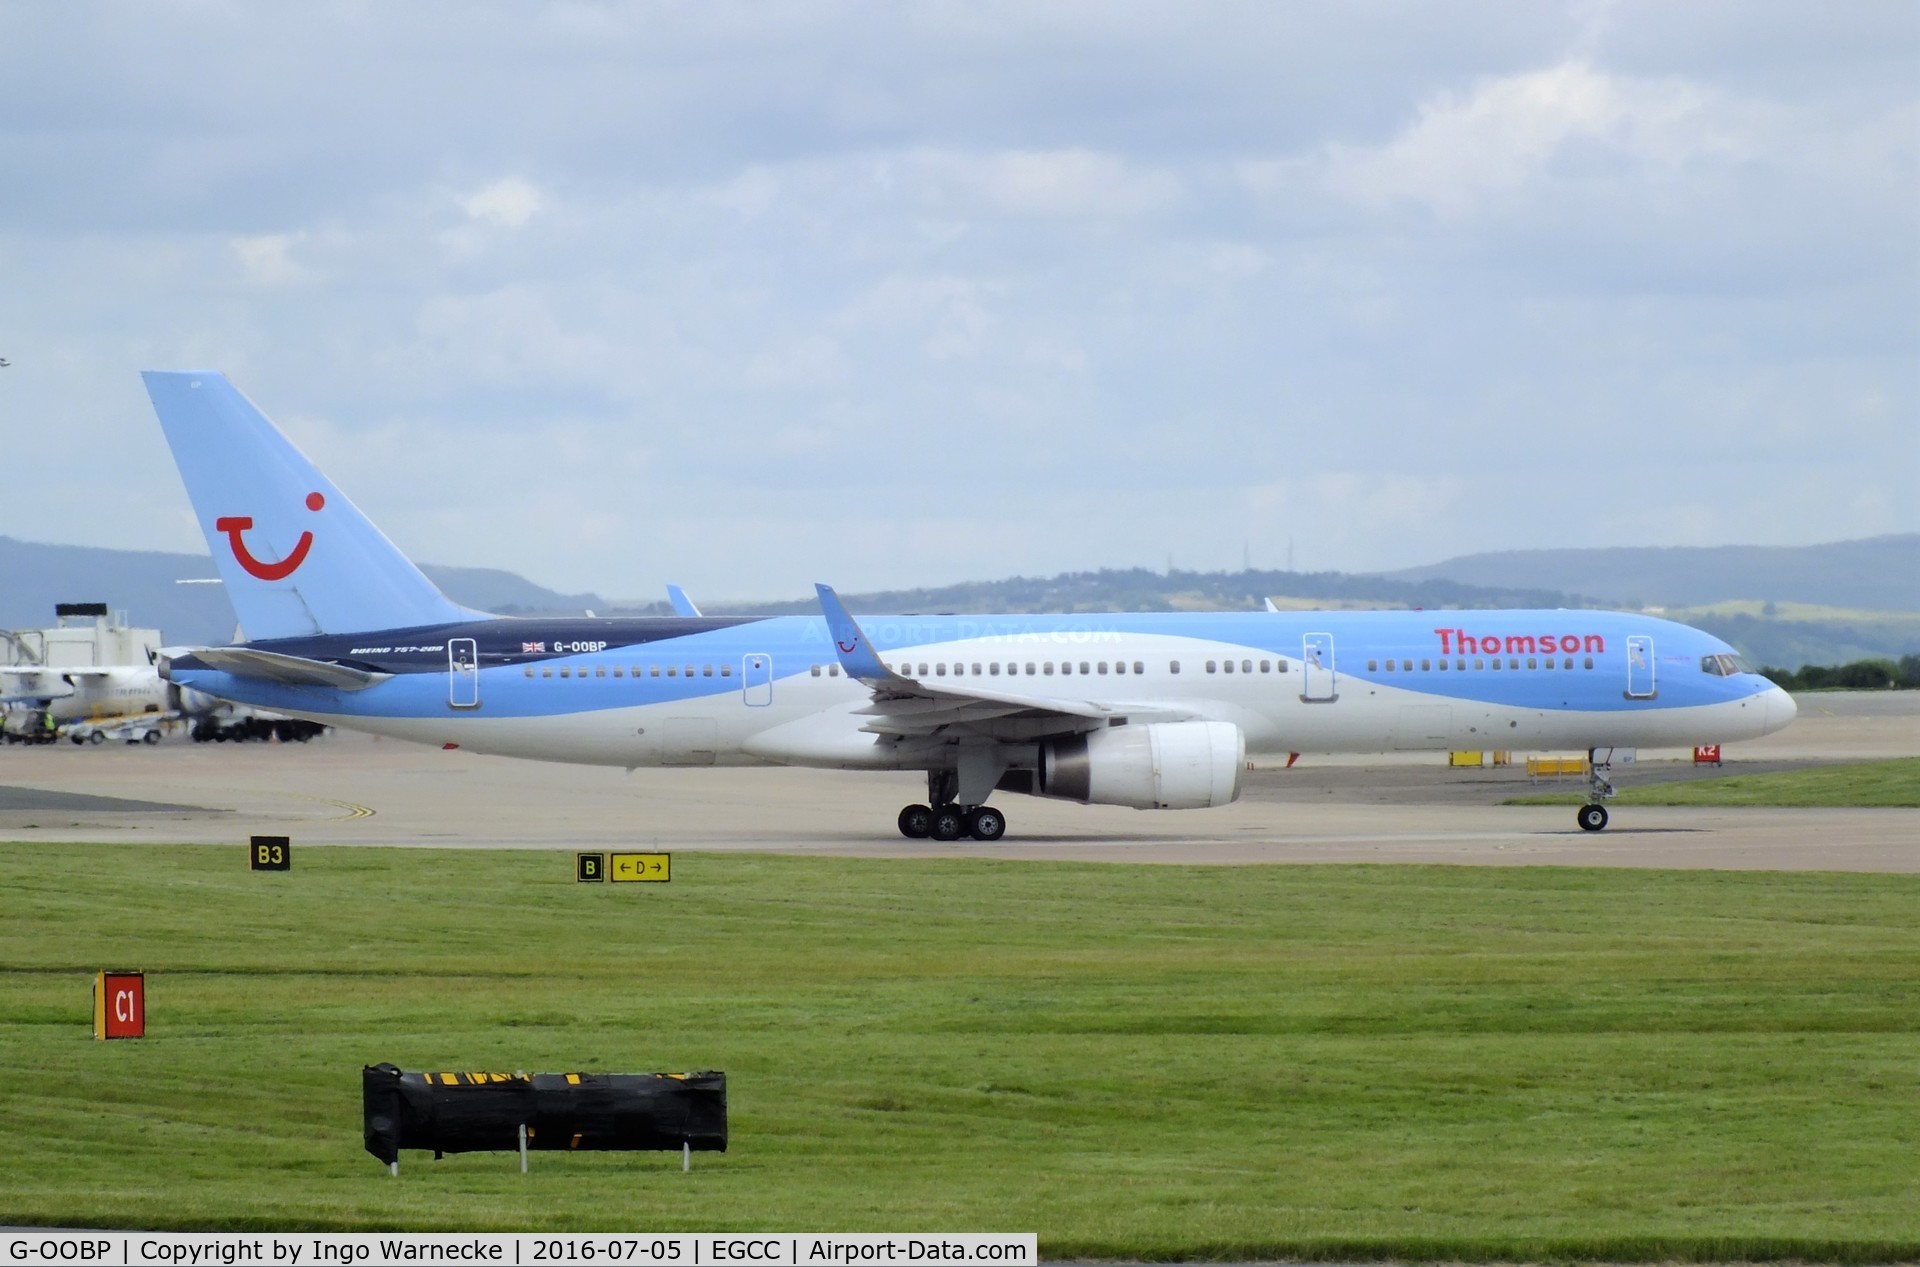 G-OOBP, 2000 Boeing 757-2G5 C/N 30394, Boeing 757-2G5 of TUI Airways (Thomson) at Manchester airport